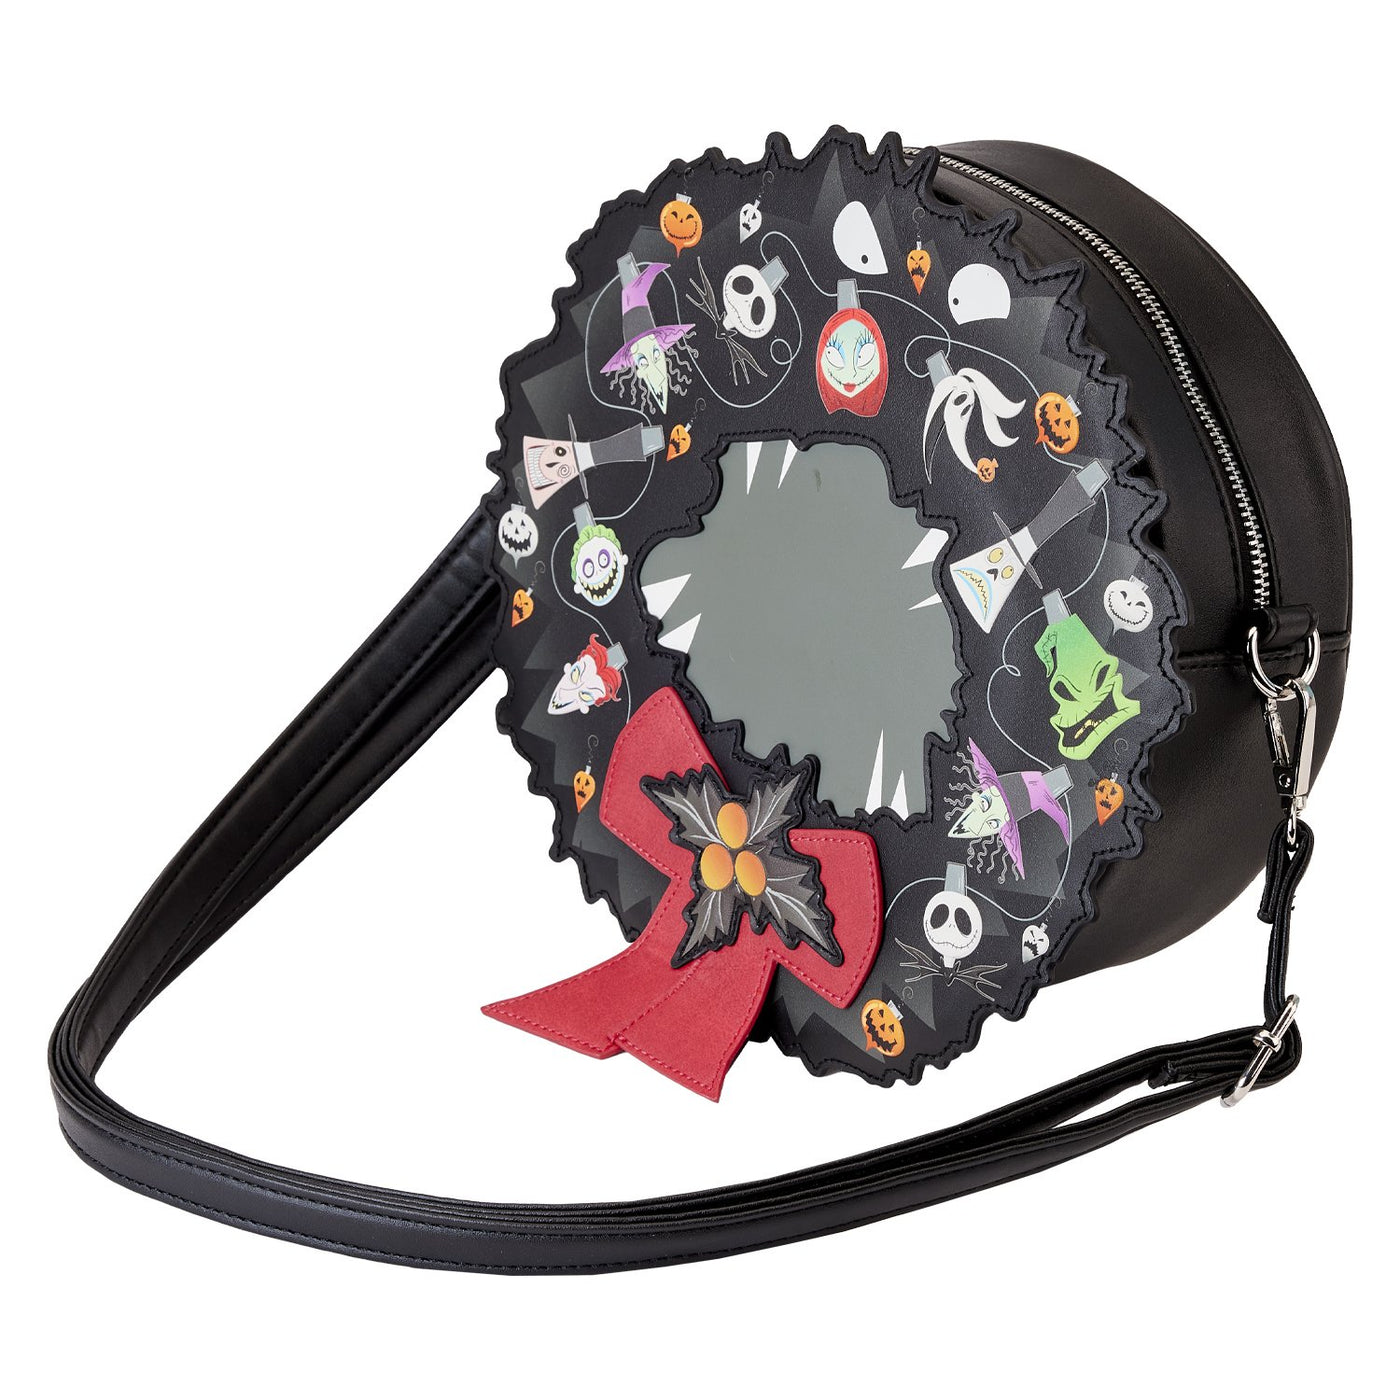 Loungefly Disney Nightmare Before Christmas Figural Wreath Crossbody - Top View